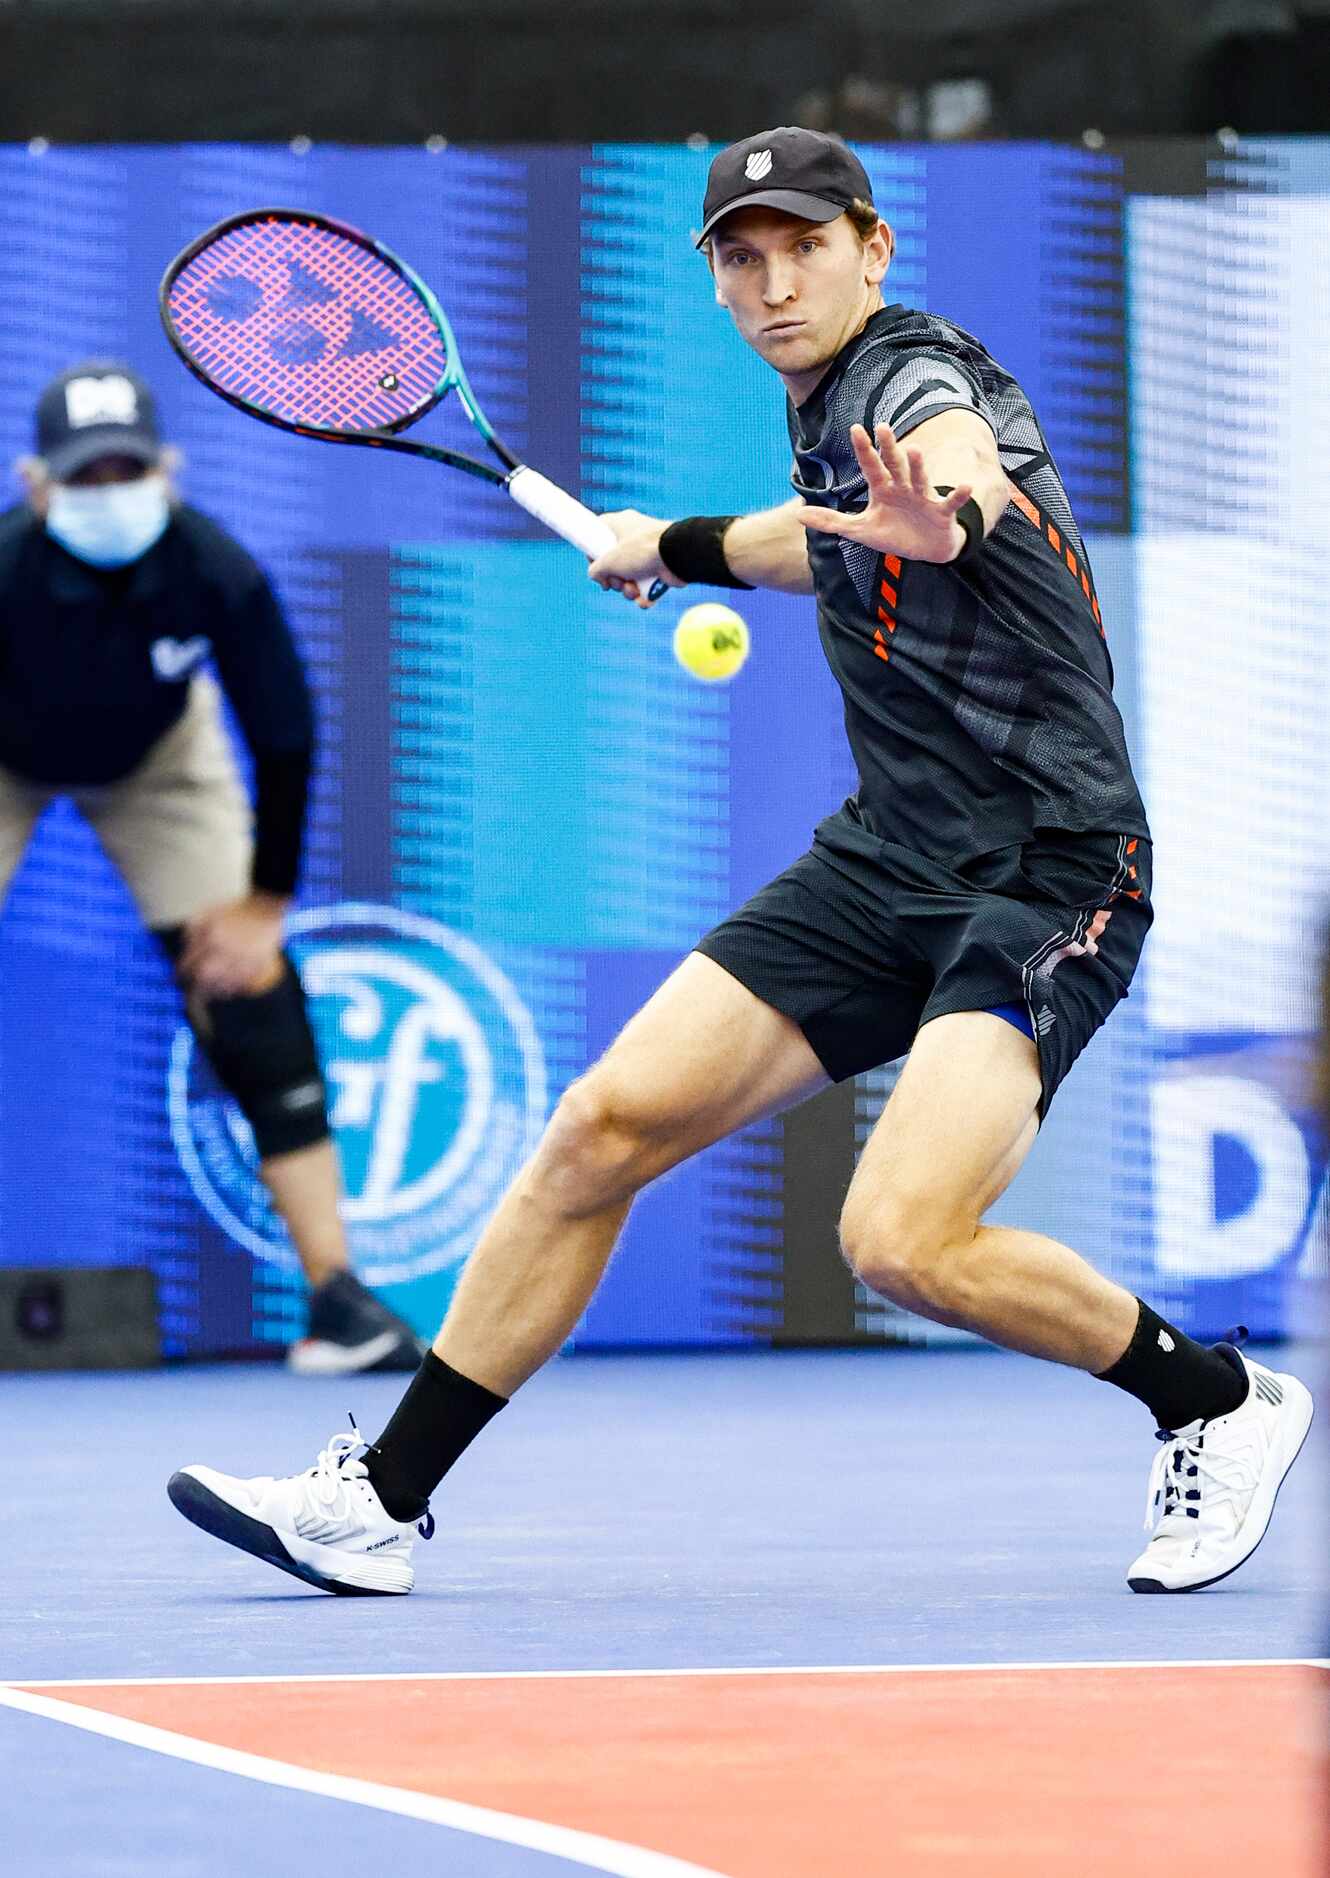 Mitchell Krueger, a Fort Worth native, returns the ball in a match against Yoshihito...